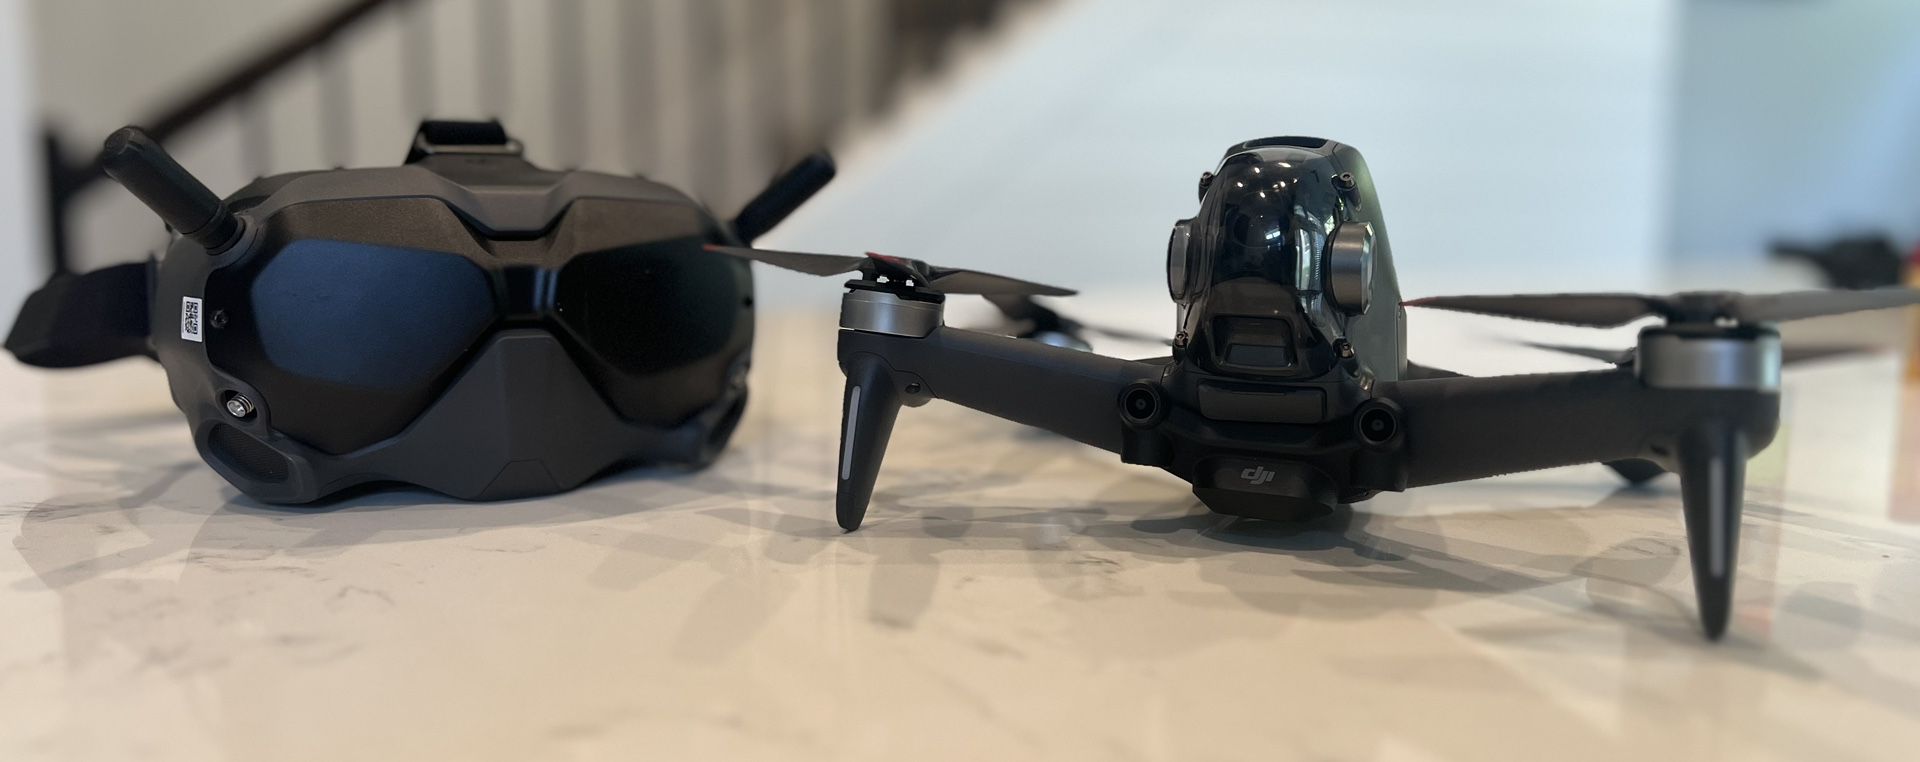 DJI FPV Drone, Goggles, And Fly More Battery Kit